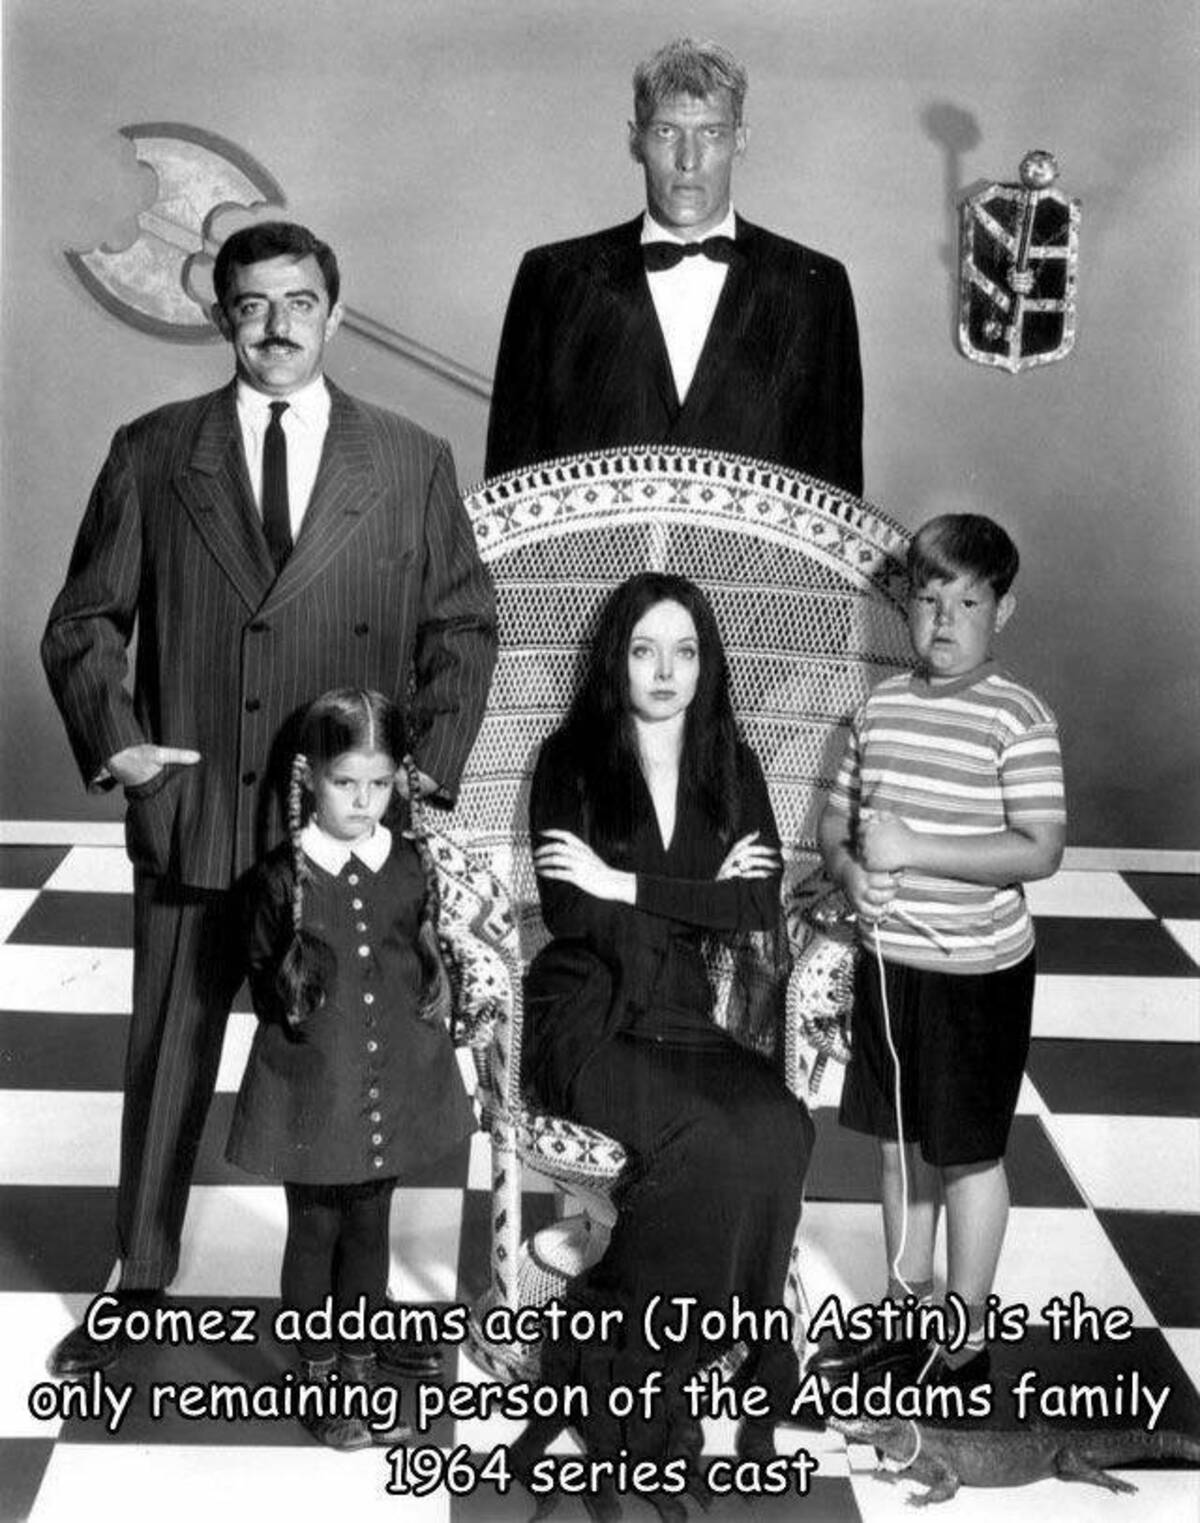 addams family - Gomez addams actor John Astin is the only remaining person of the Addams family 1964 series cast